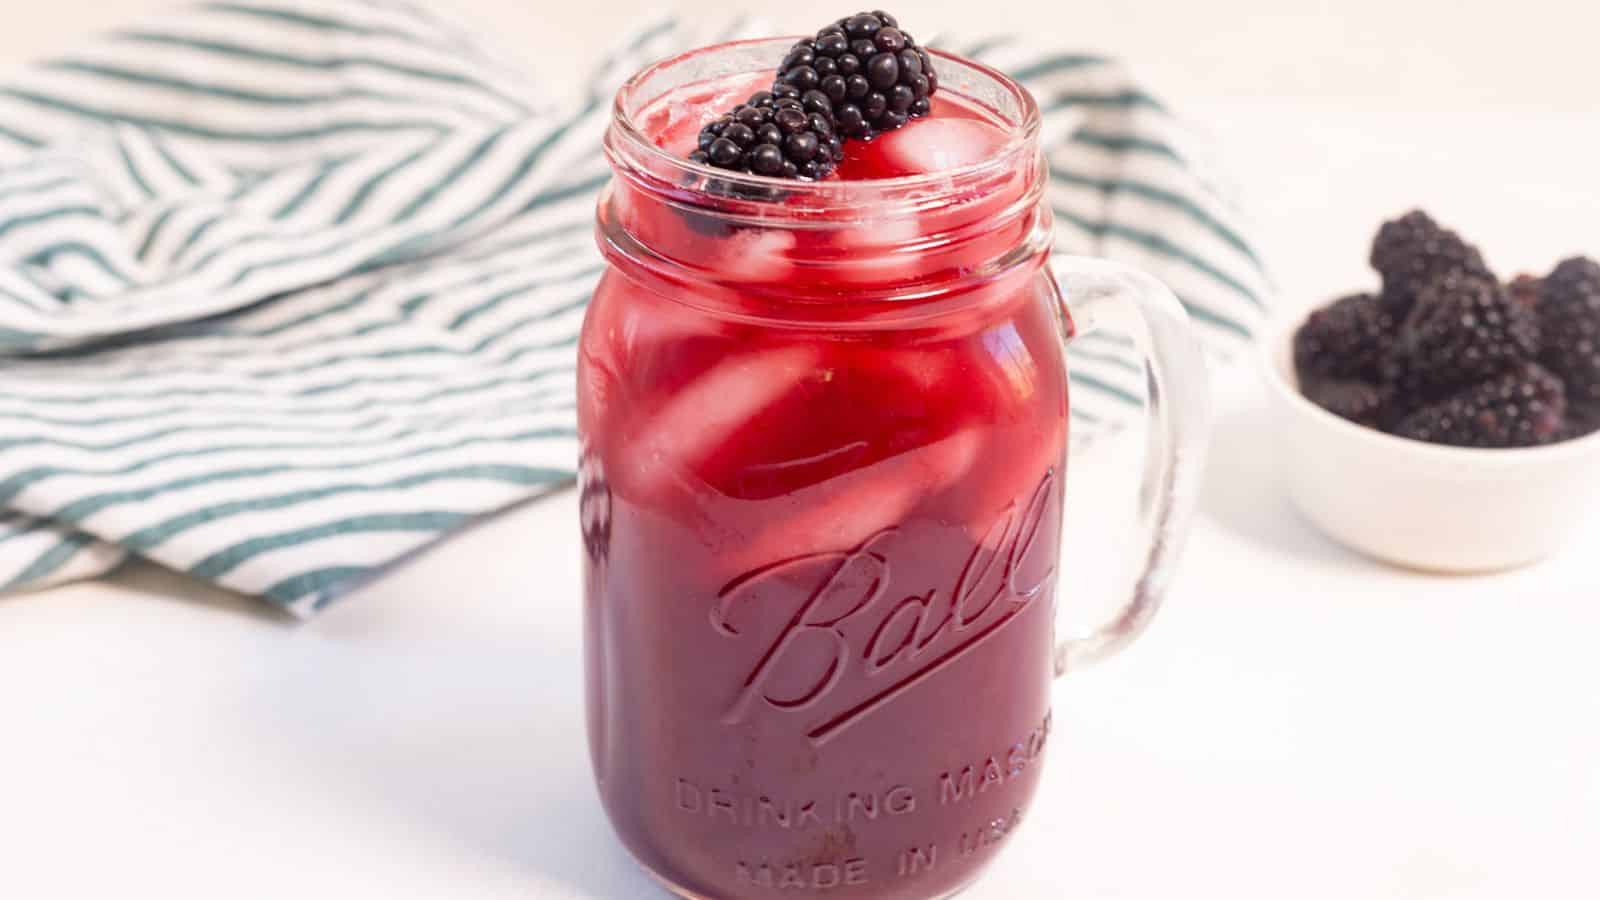 A glass mason jar filled with a red berry drink and topped with blackberries, accompanied by a small bowl of blackberries and a striped napkin on a white surface.